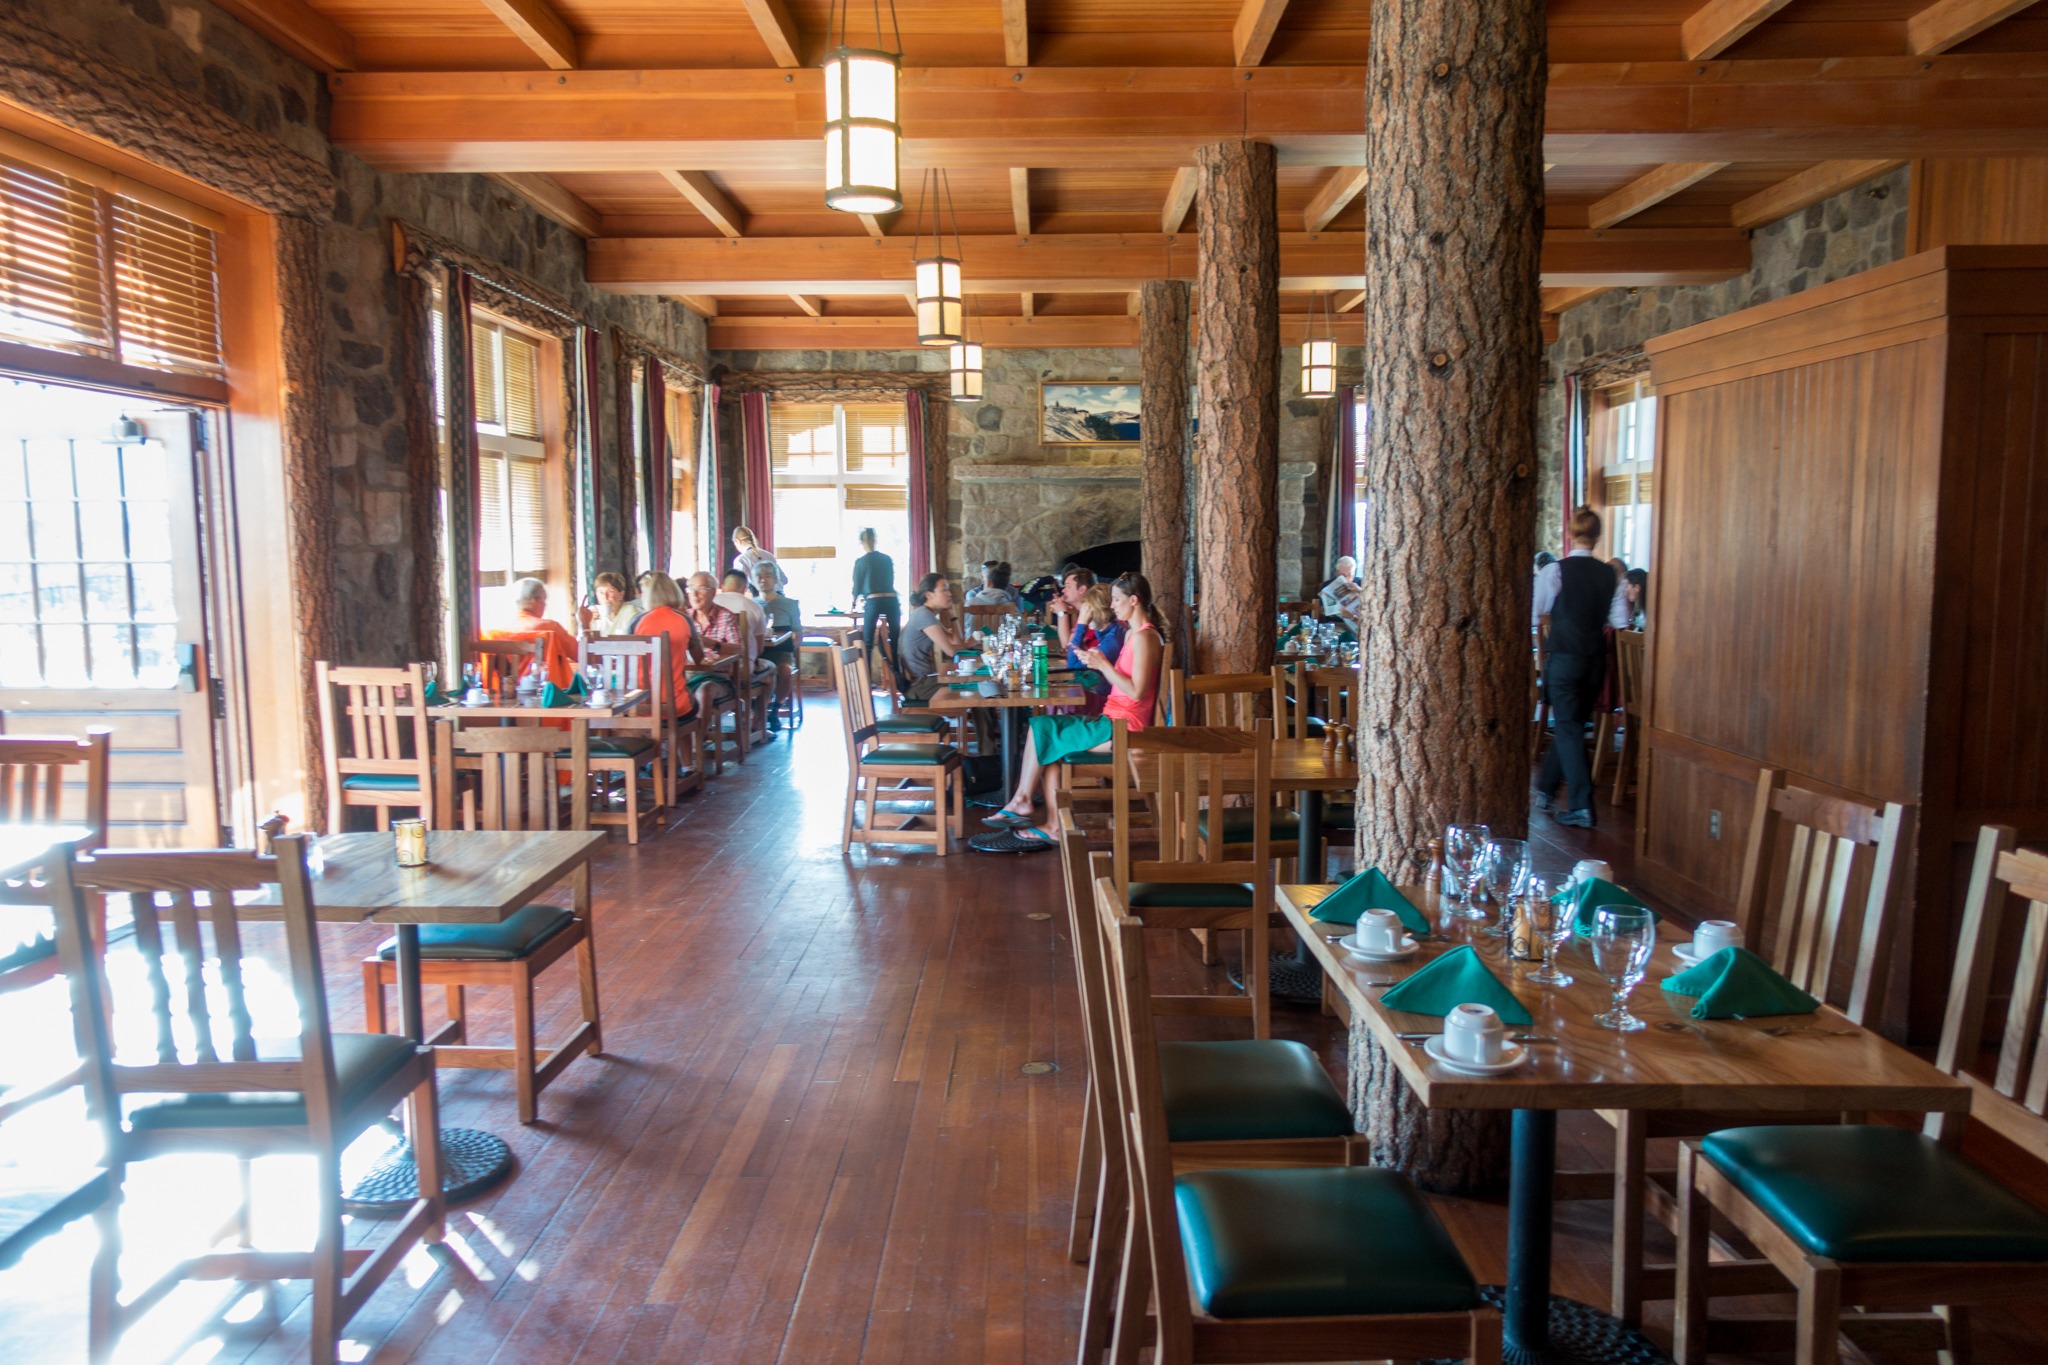 Crater Lake Lodge Dining Room Lunch Menu